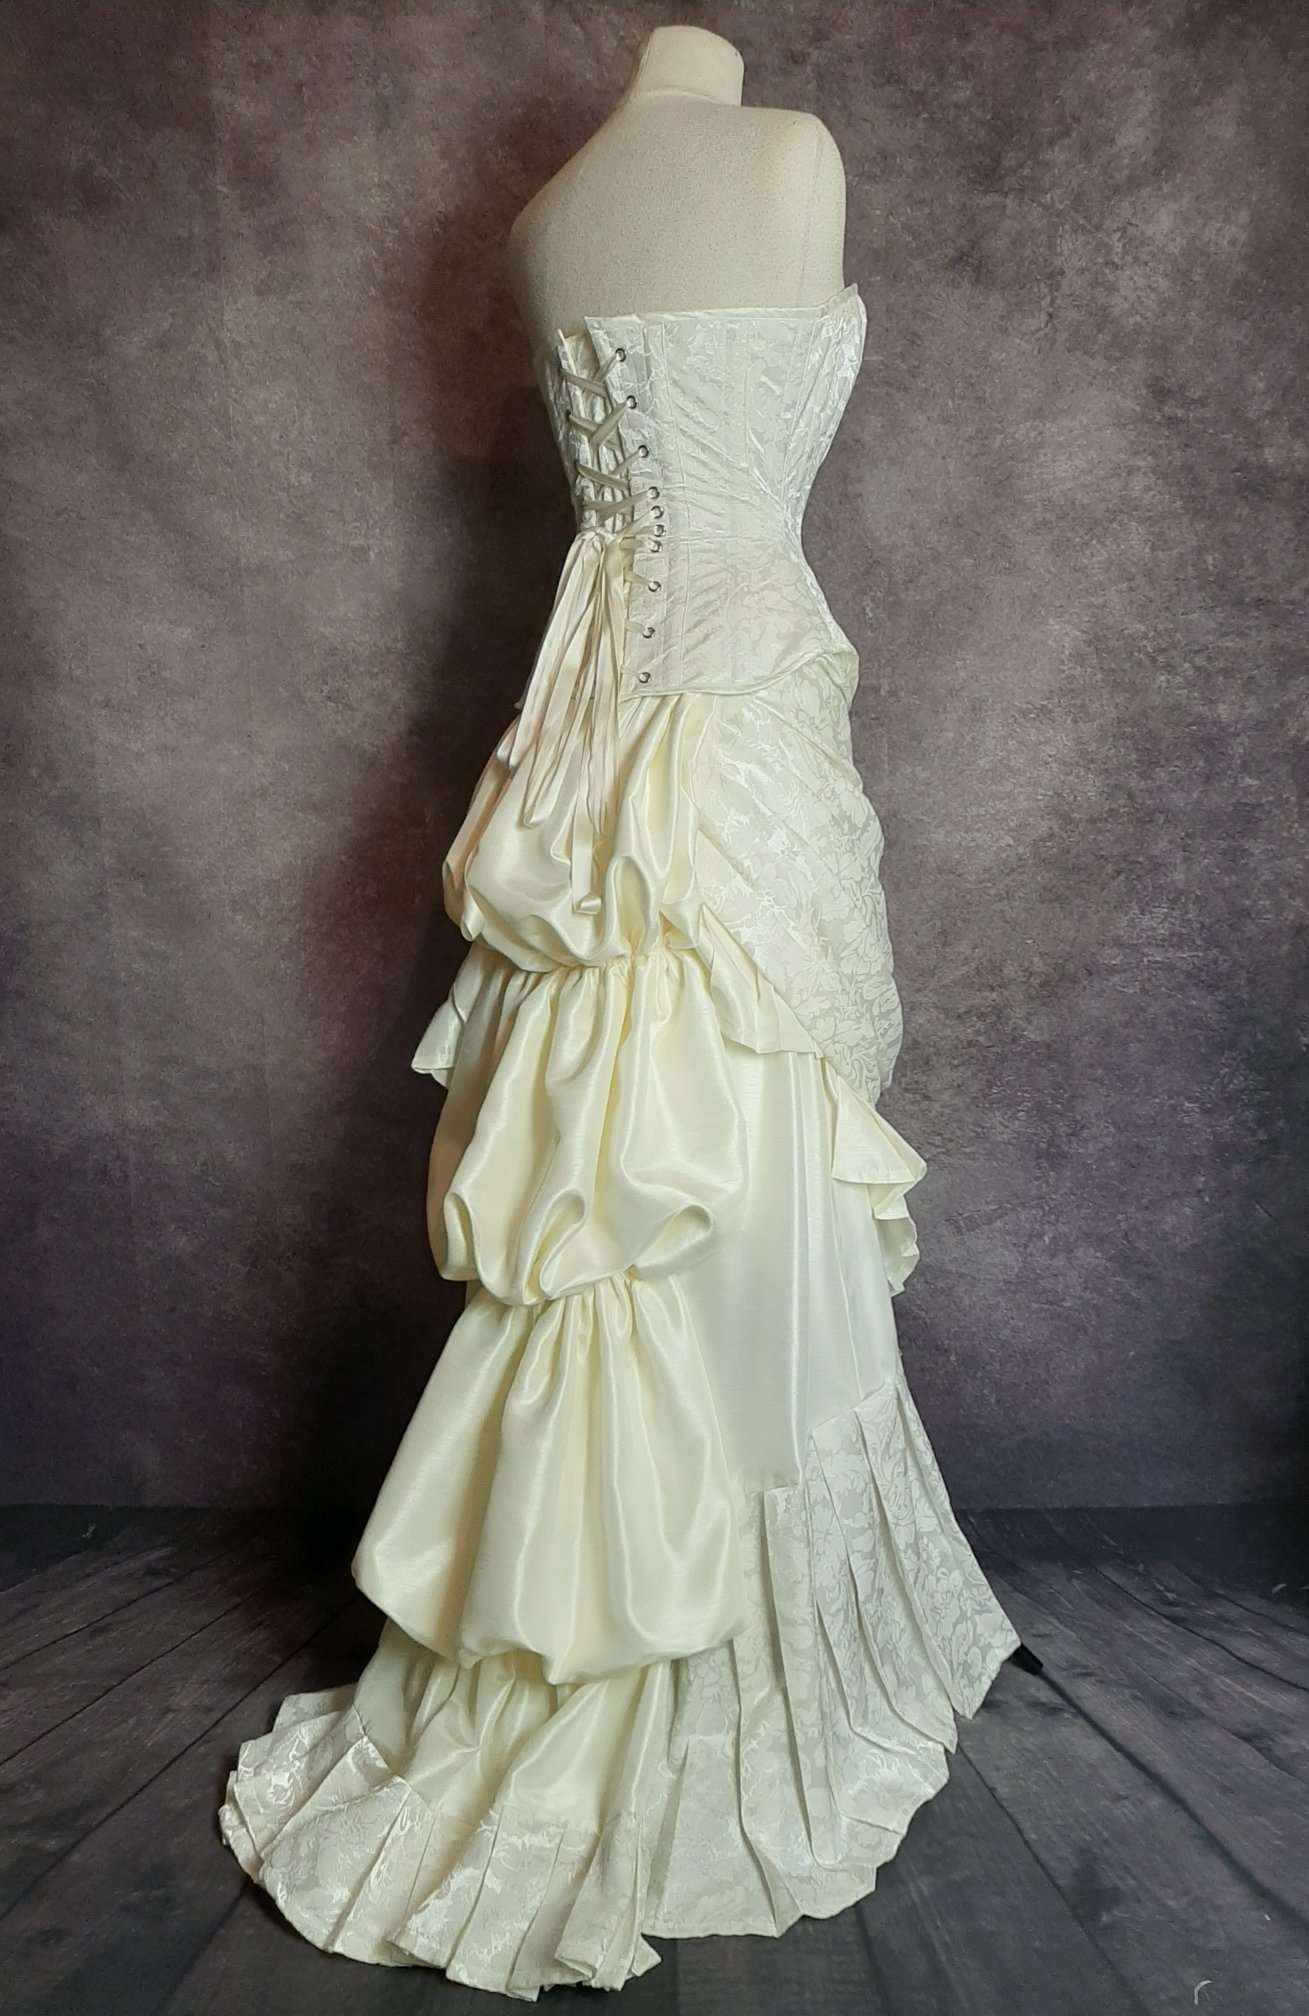 side view of the ivory victorian 1880's inspired wedding corset gown made in Australia by Gallery Serpentine